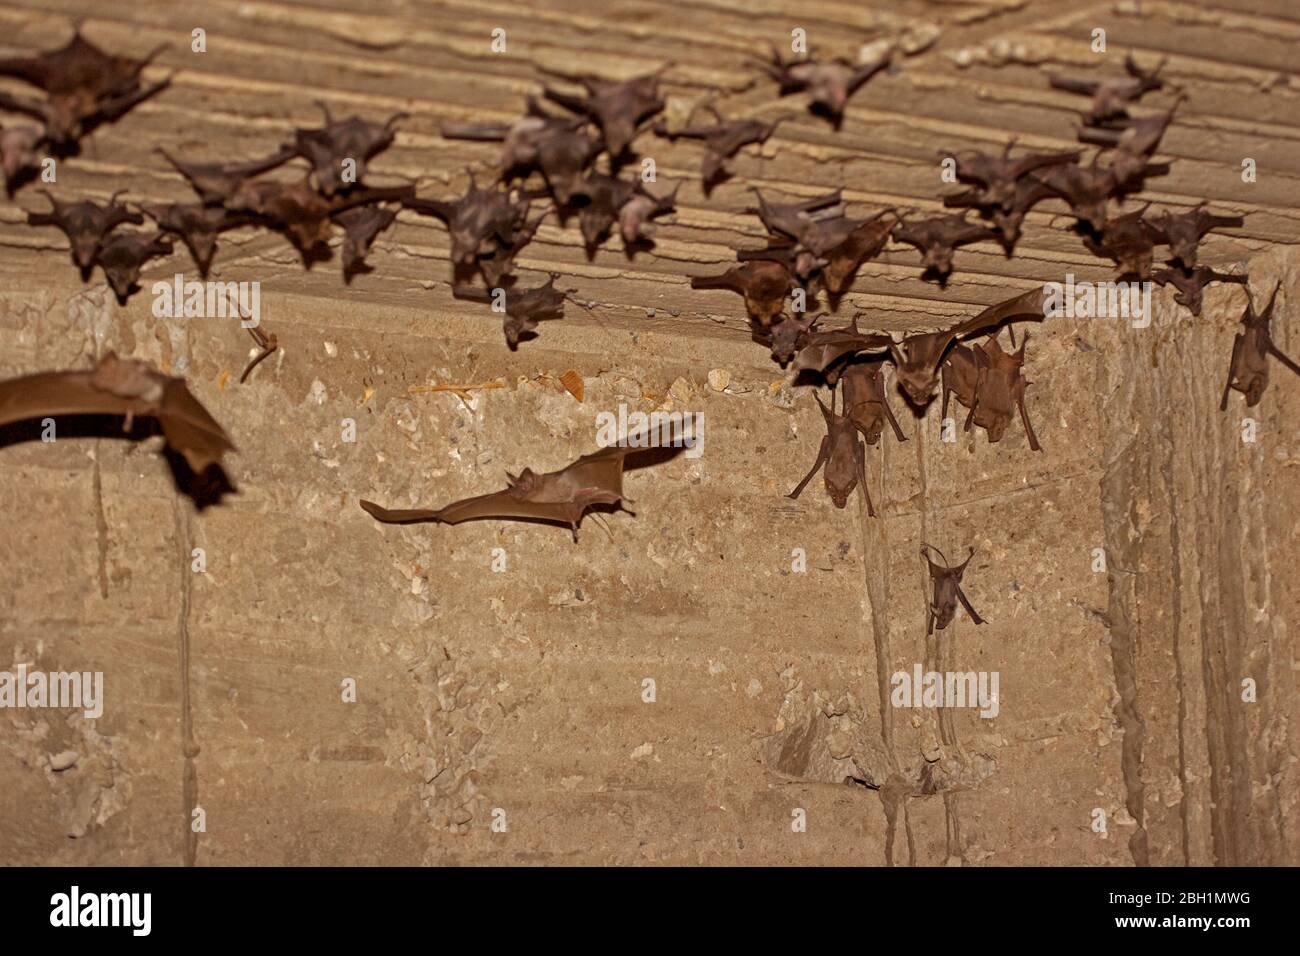 Greater Mouse-tailed Bat (Rhinopoma microphyllum) is a species of bat in the Rhinopomatidae family. It's distribution range extends from northern Afri Stock Photo